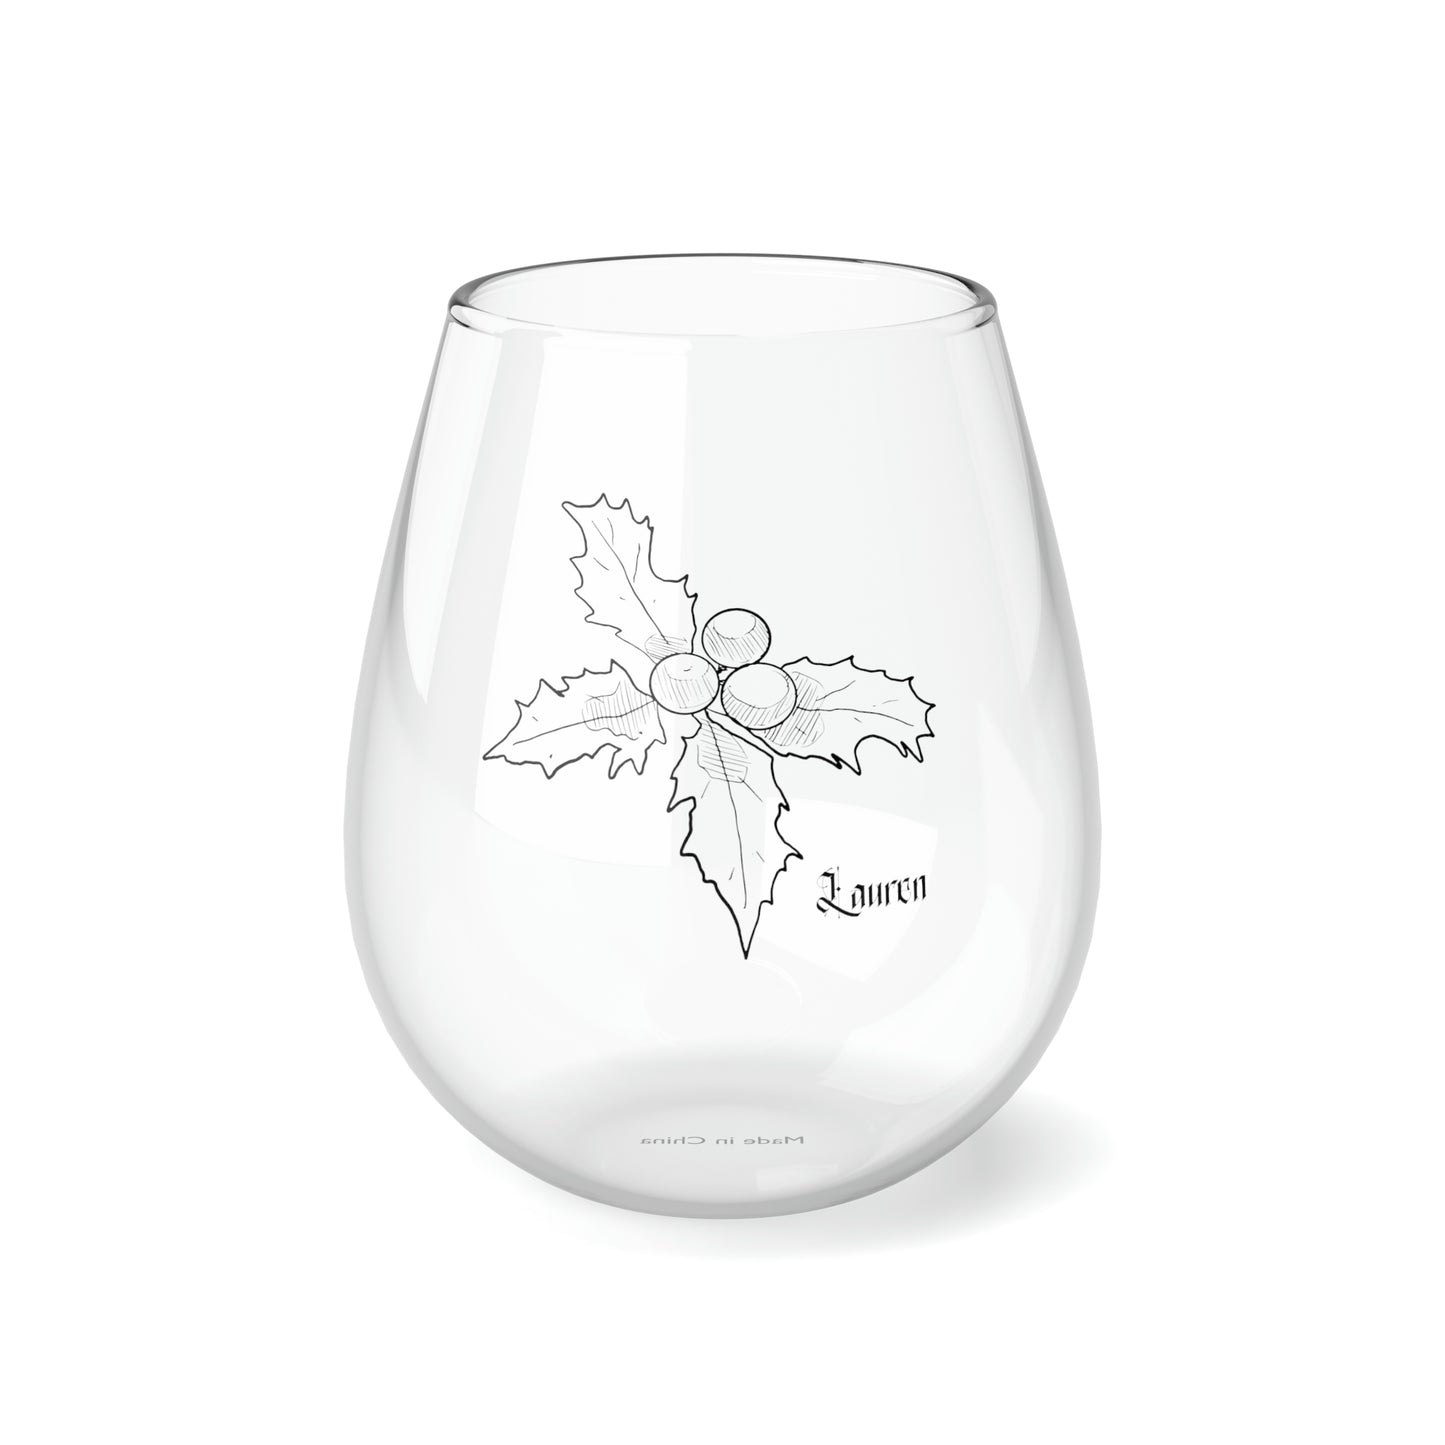 December PERSONALIZED Birth Flower Wine Glass, Birth Flower Gifts, Birth Flower wine glass, Birth Flower Gifts for Women, Gift for coworker, sister gift, birthday gift, Valentine gift, Stemless Wine Glass, 11.75oz